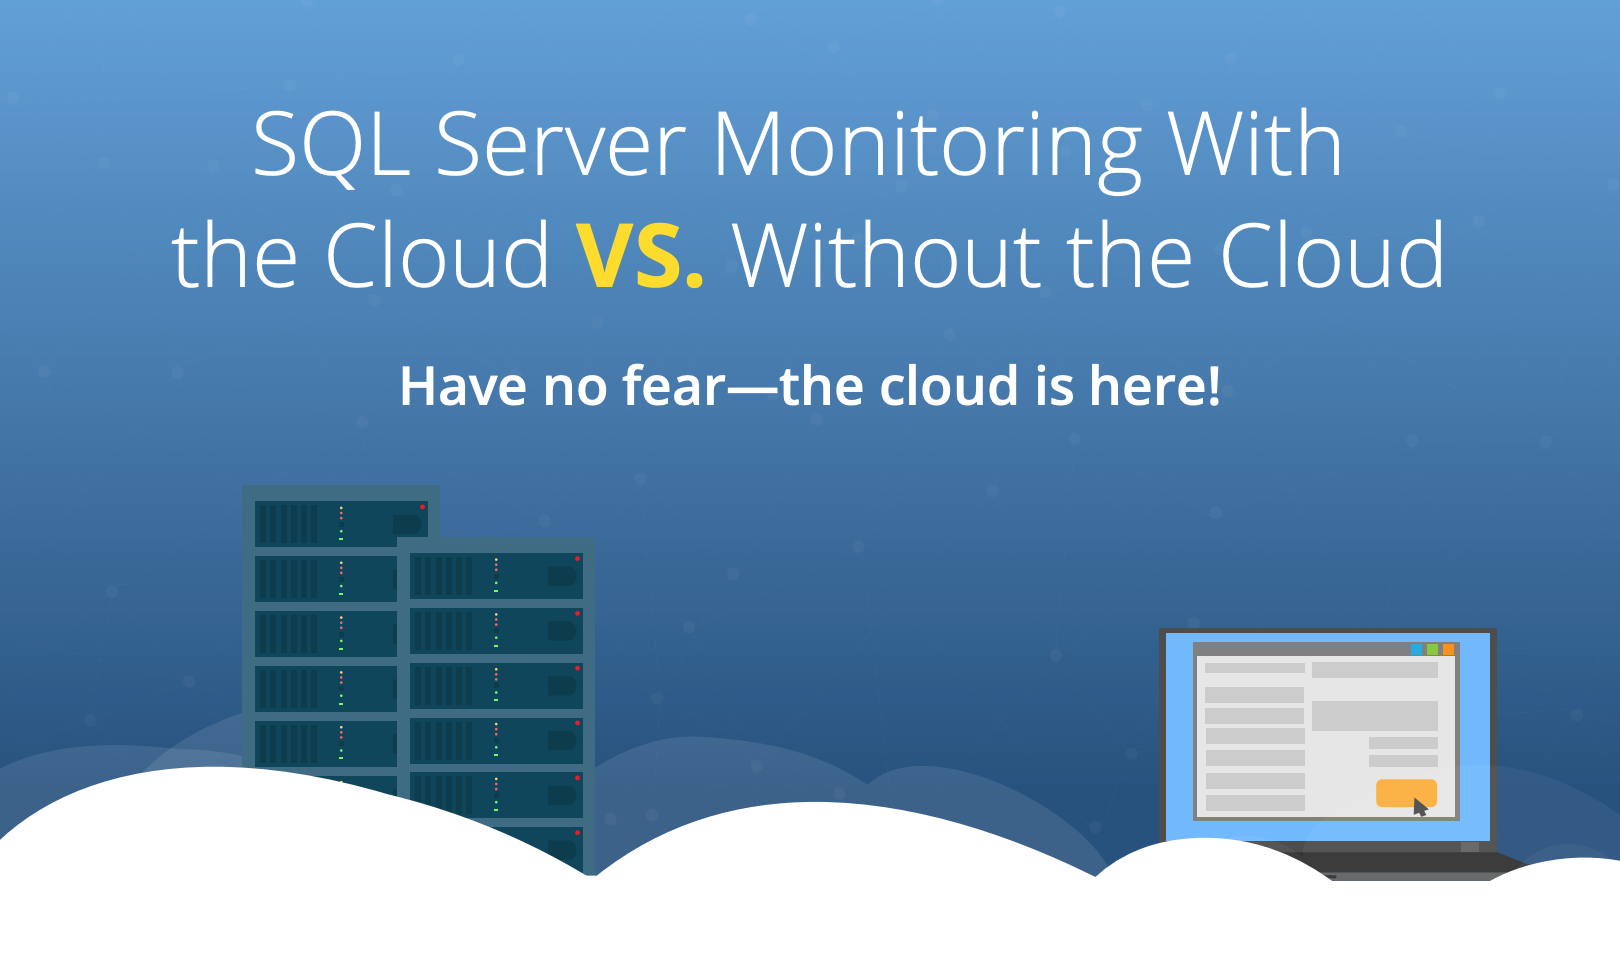 SC-_SQL_Server_Monitoring_With_the_Cloud_vs__Without_the_Cloud-V5